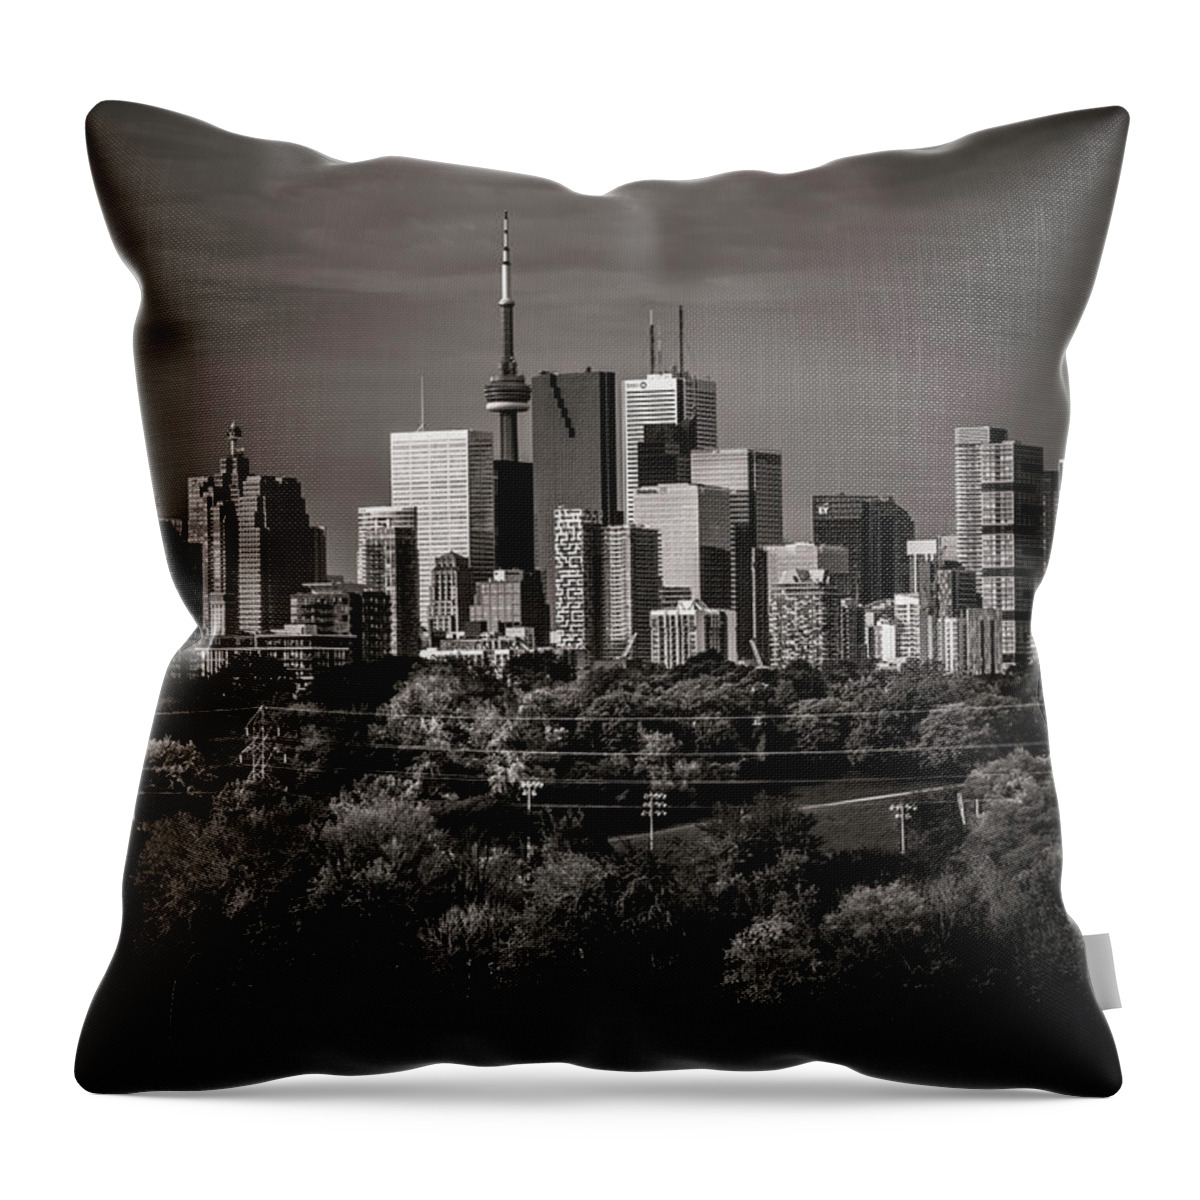 Brian Carson Throw Pillow featuring the photograph Toronto Skyline From Riverdale Park No 6 by Brian Carson